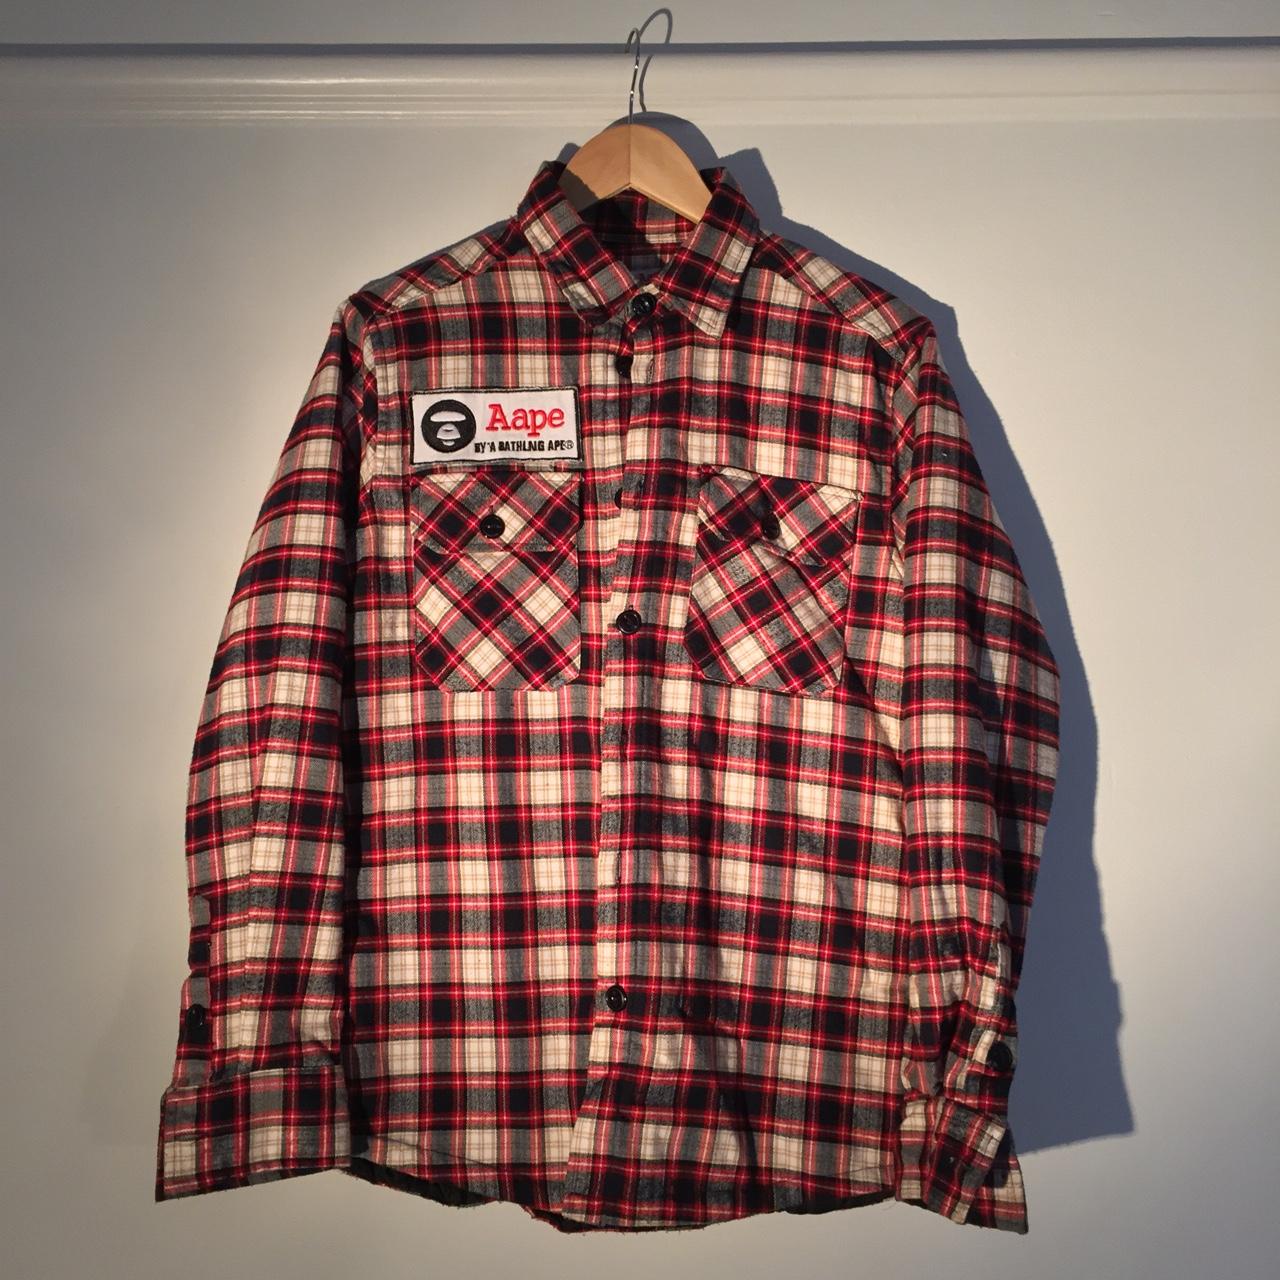 Gully Aape quilted flannel shirt by A Bathing Ape /... - Depop